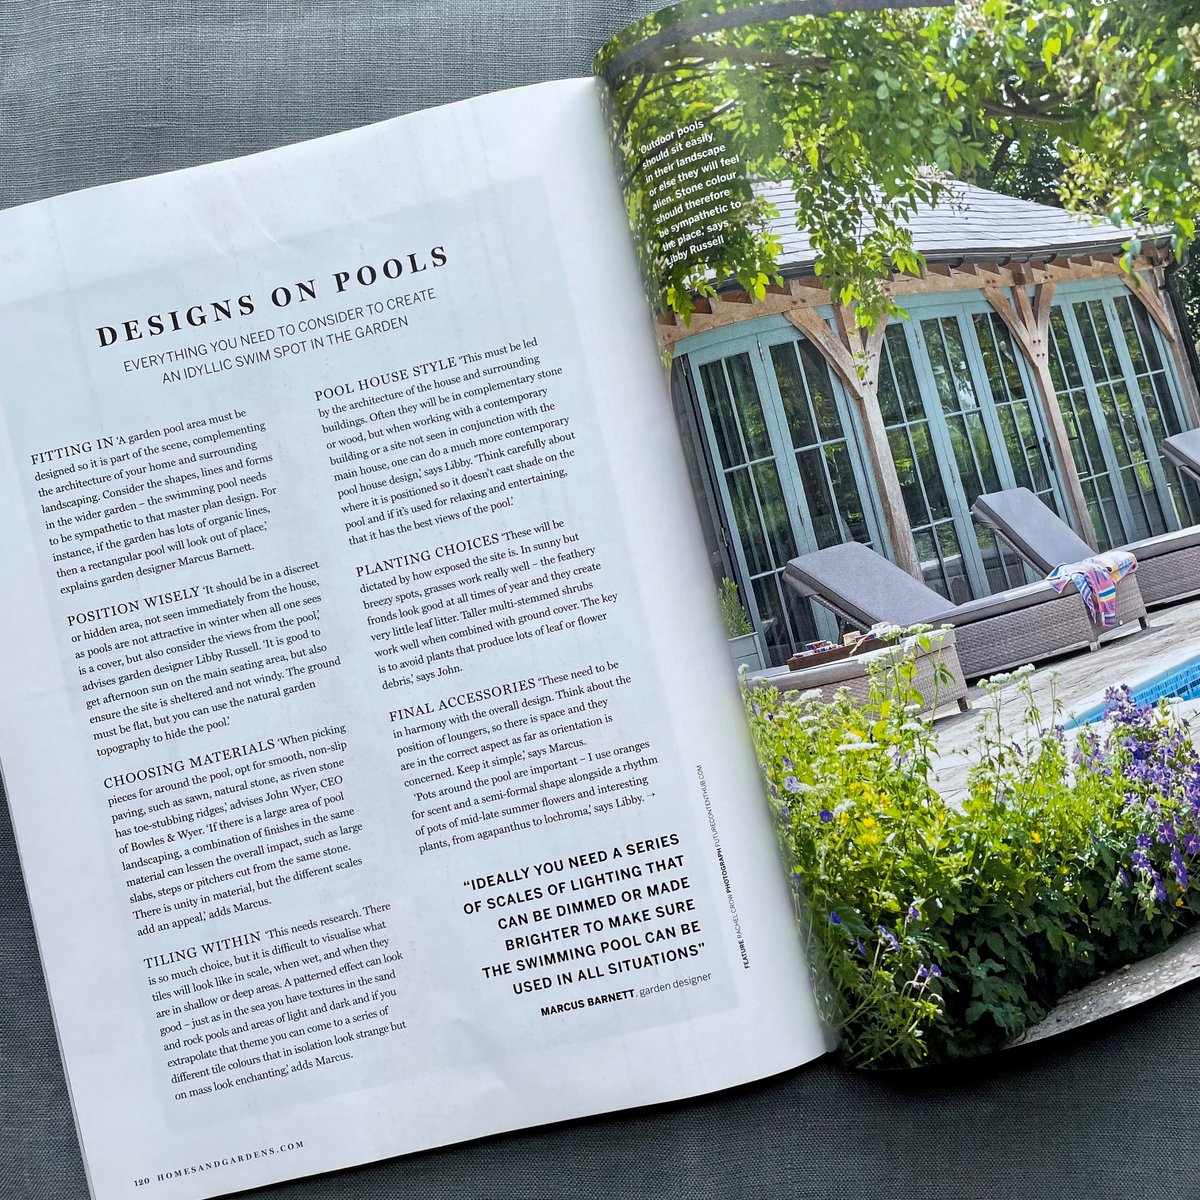 Great to see our advice on designing pool areas featured in Homes & Gardens magazine this month!

#inthepress #gardendesign #pool #poolarea #garden #gardening #design #gardendesignideas #gardeninspiration #horticulture #planting #poolpaving